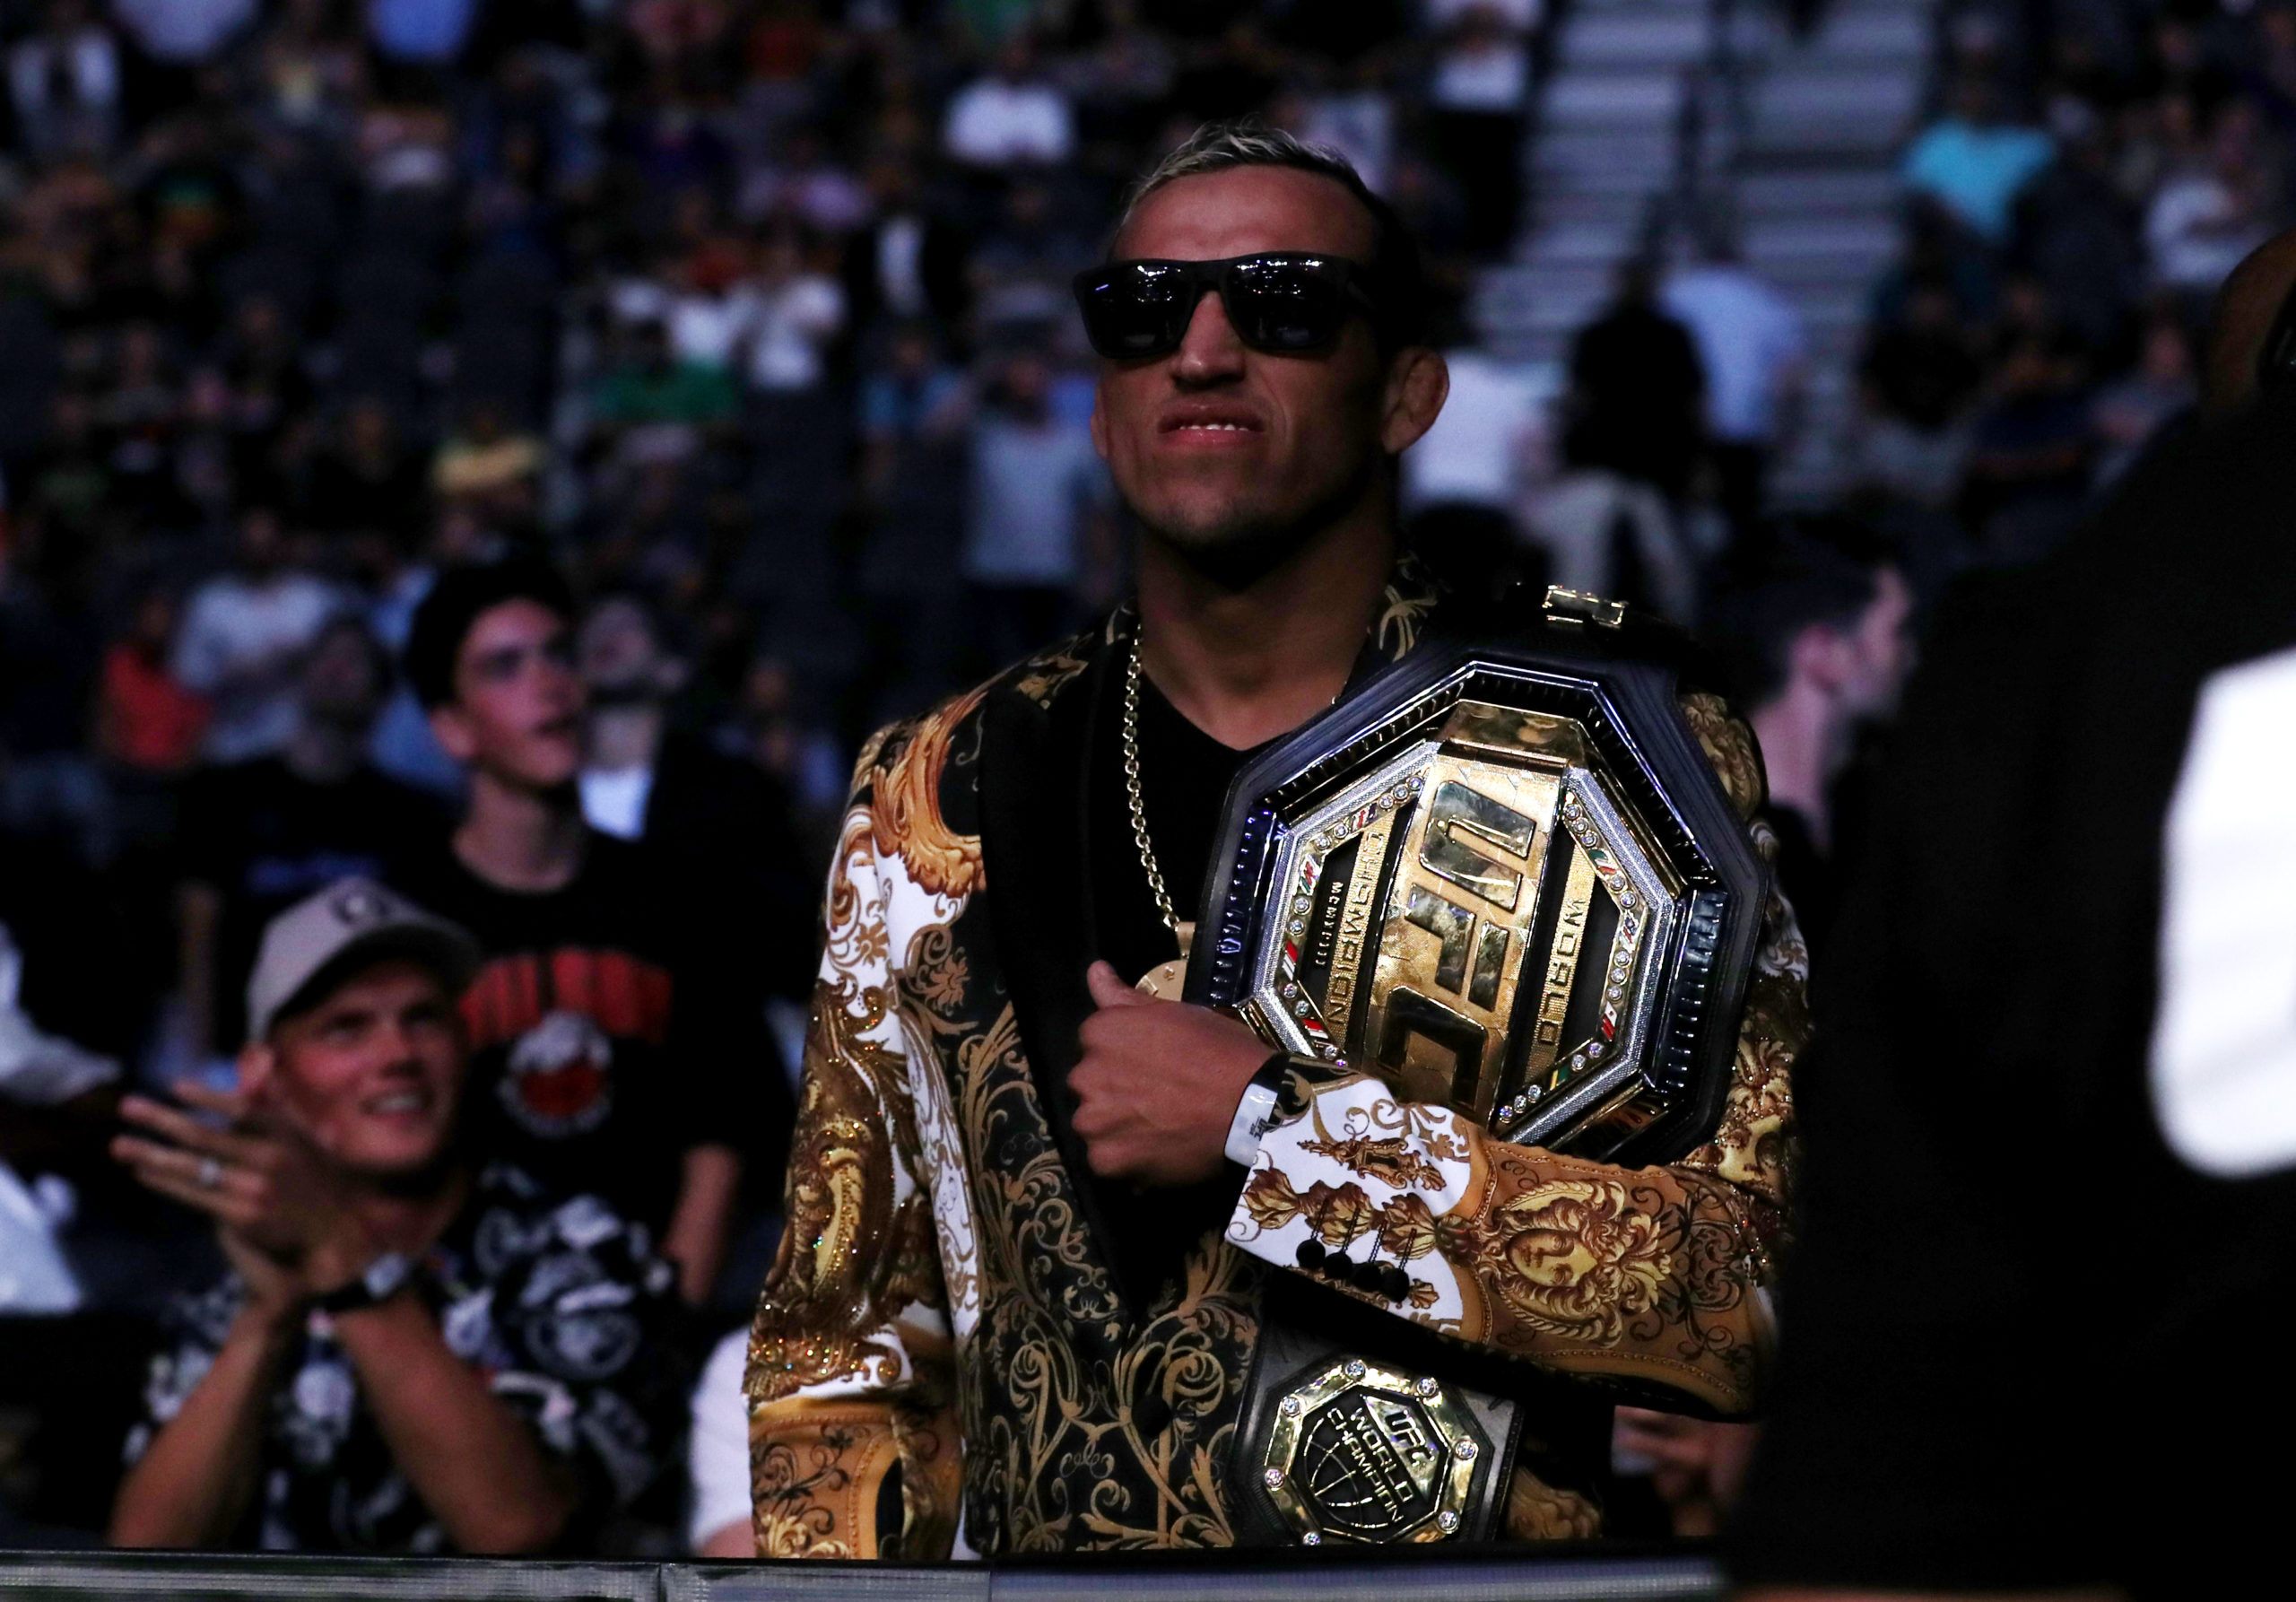 FILE PHOTO: MMA - UFC264 - Dustin Poirier v Conor McGregor - T-Mobile Arena, Las Vegas, United States - July 10, 2021 UFC Lightweight Champion Charles Oliveira is seen before the main event 